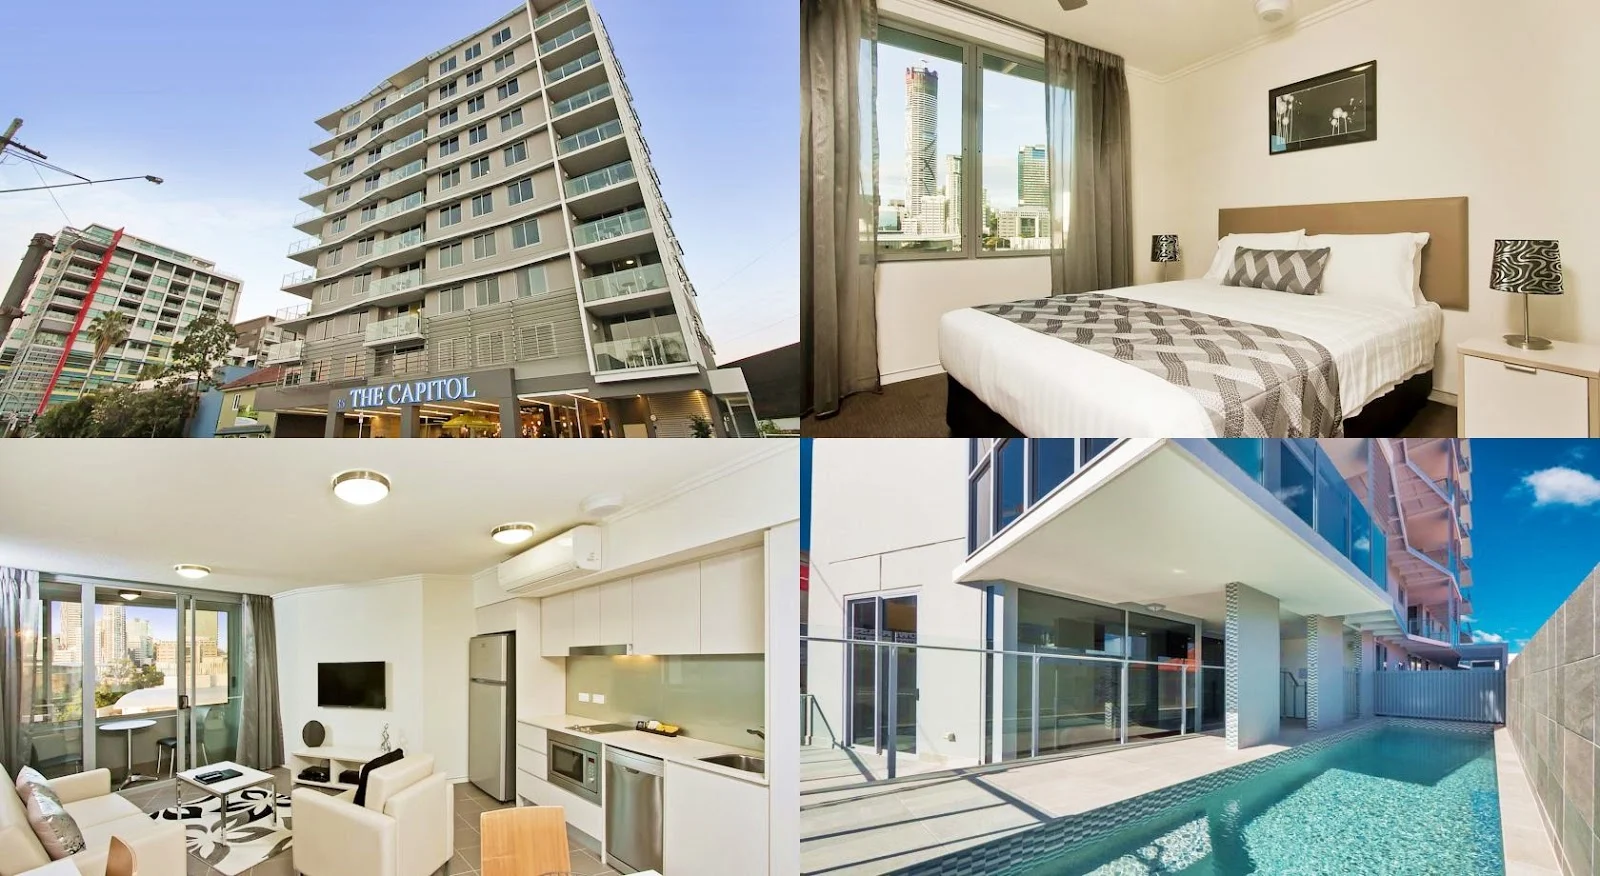 Brisbane-city-cbd-best-hotels-accommodation-apartments-motel-booking-deals-families-holiday-vacation-students-tourists-recommendations